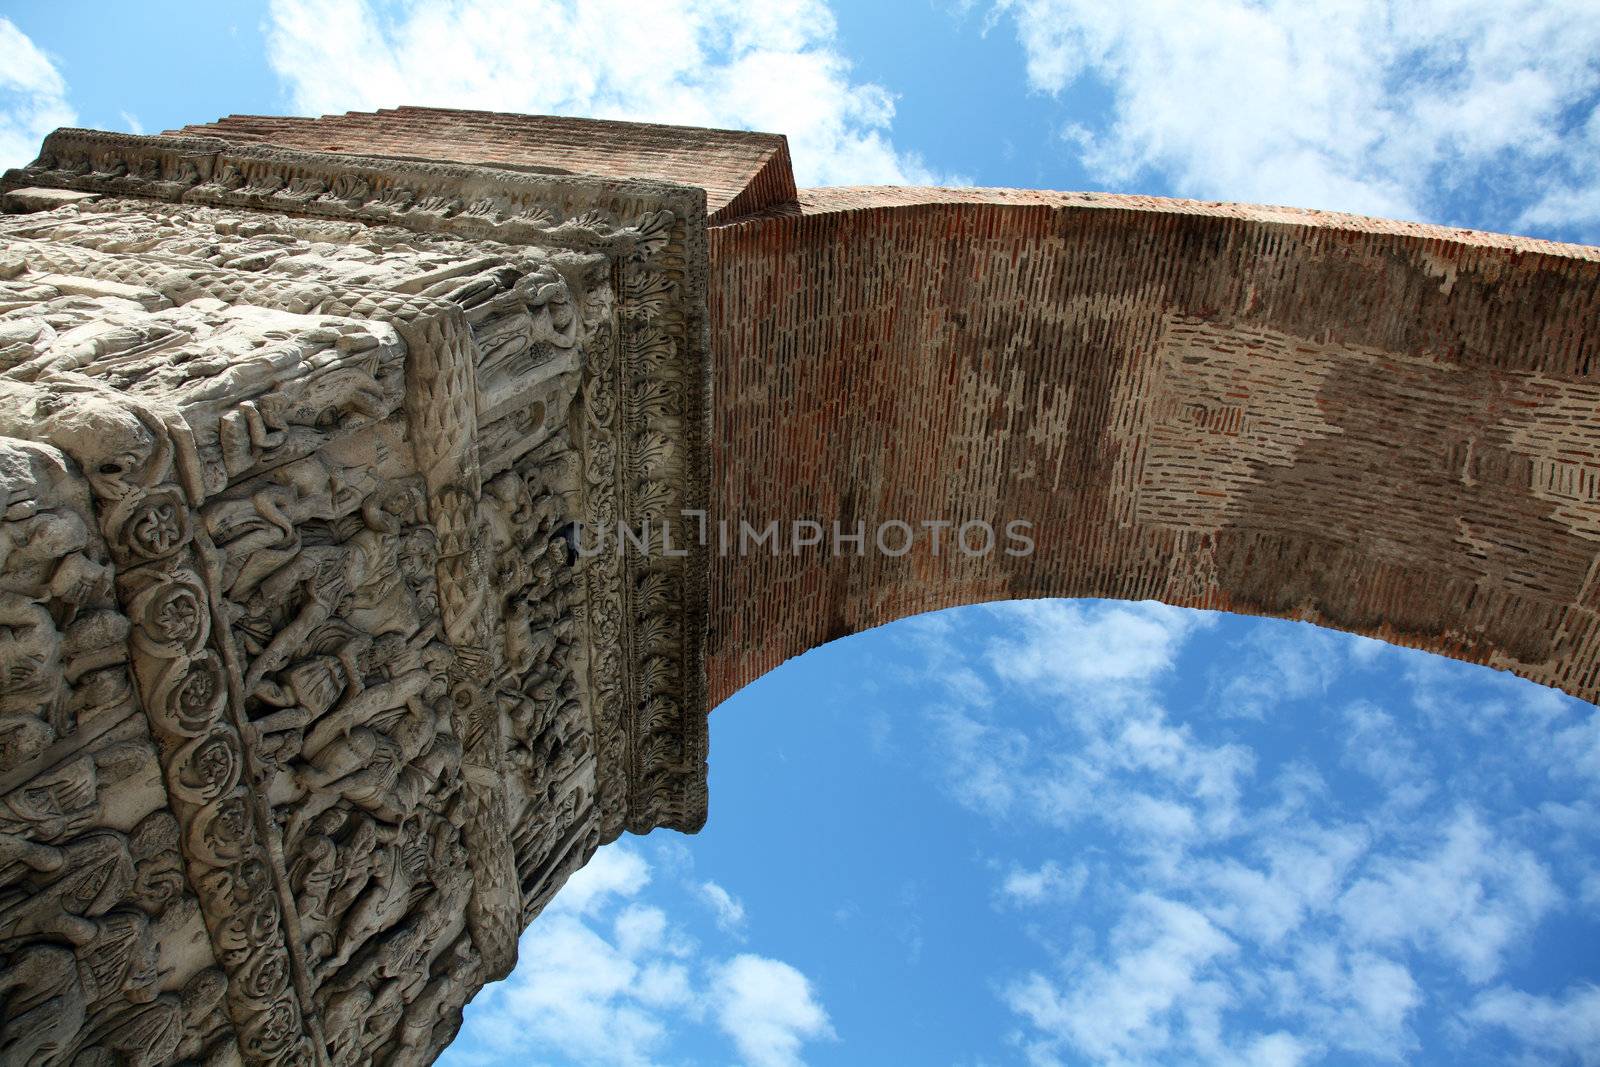 Arch of Galerius by Portokalis